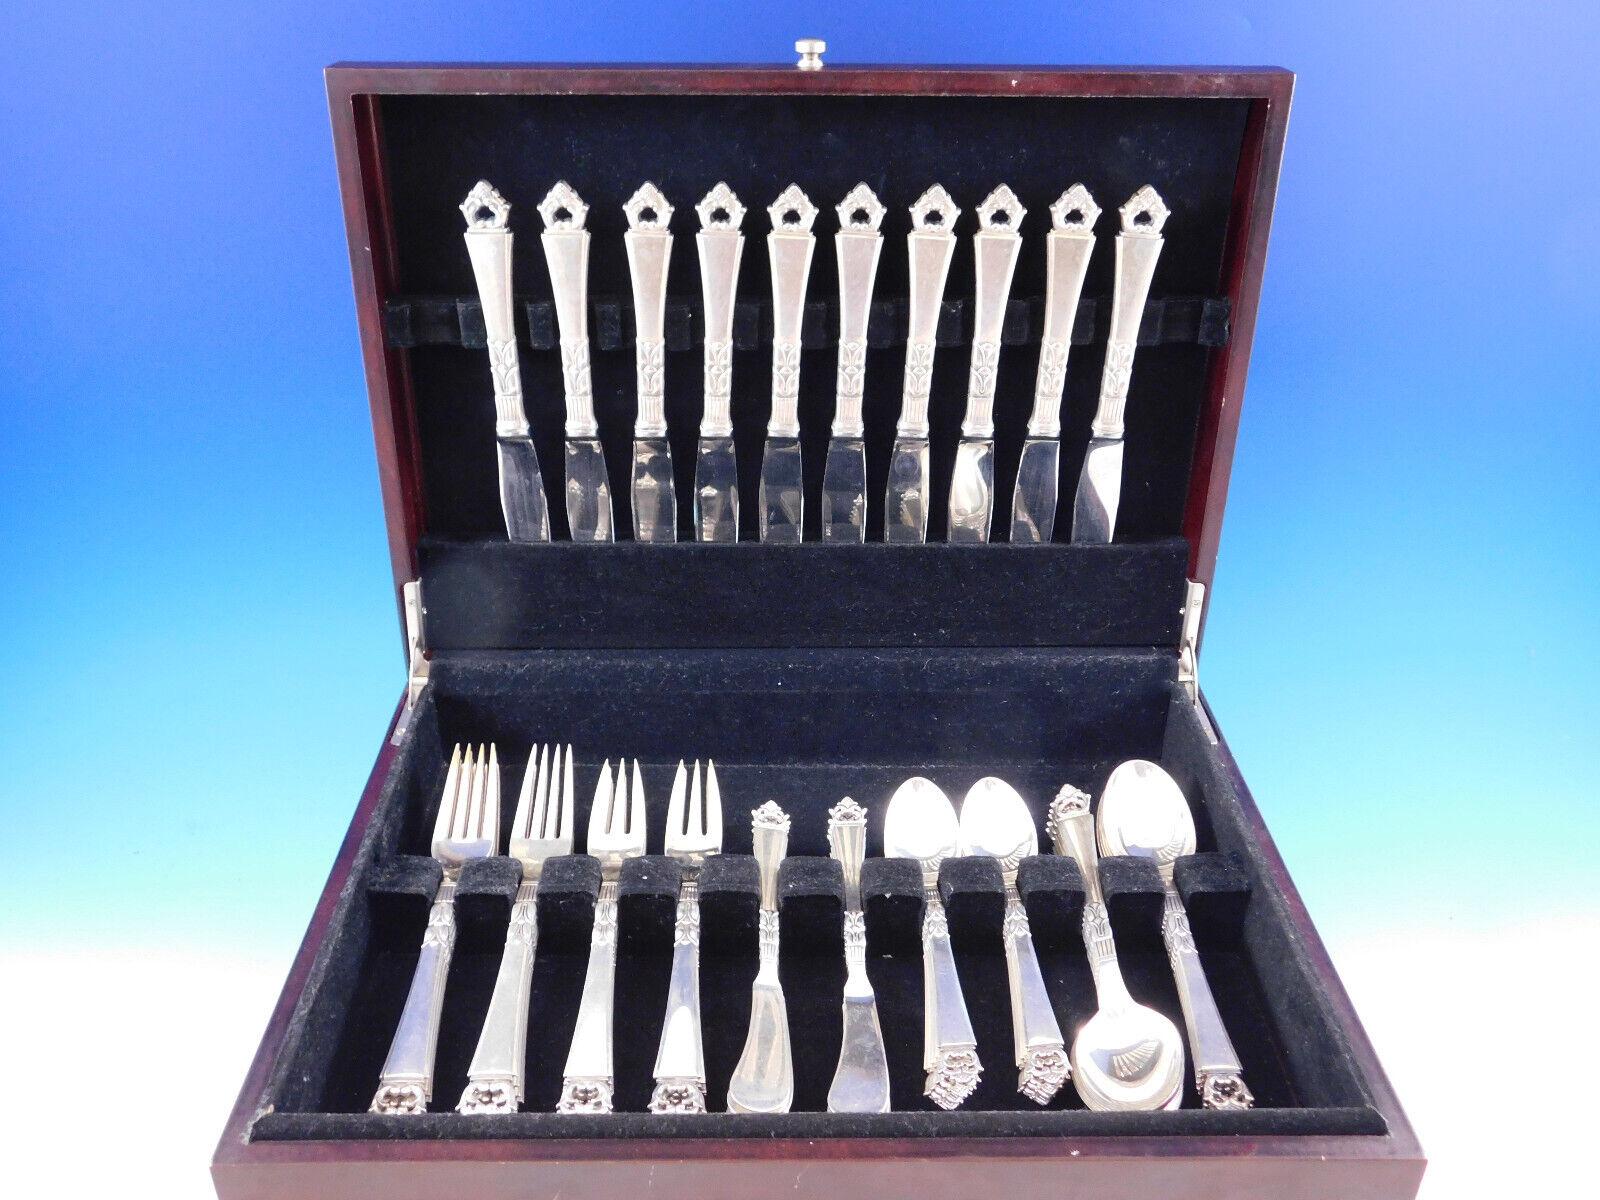 Danish Crown by Frigast Silversmiths of Copenhagen, Denmark sterling silver Flatware set - 60 pieces. This set includes:


10 Knives, 8 3/4